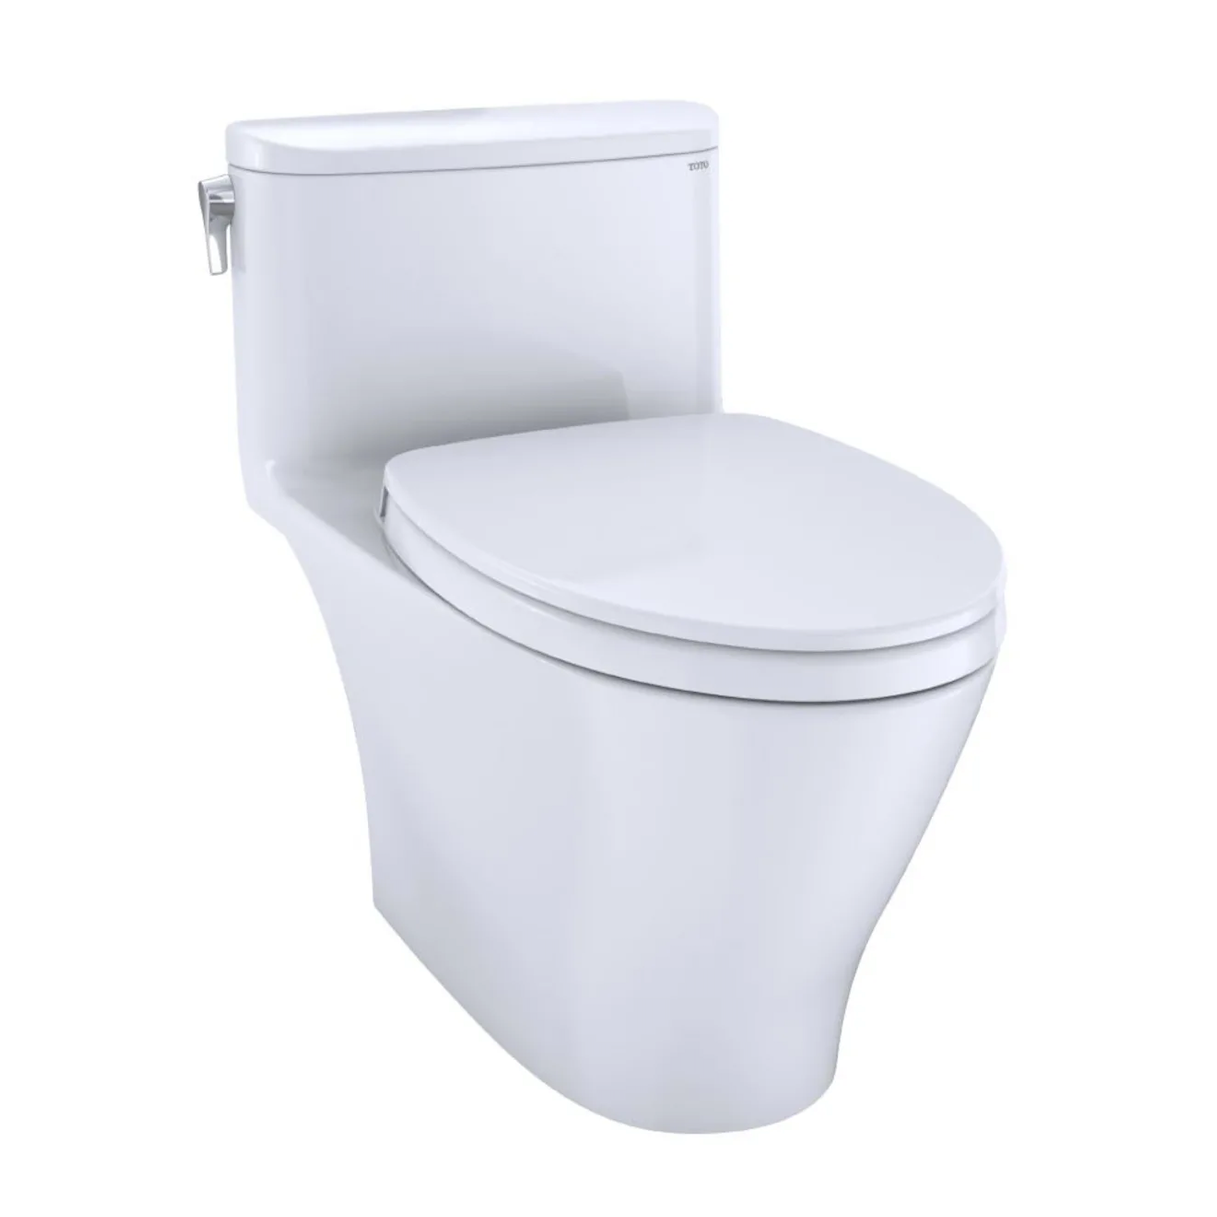 TOTO Nexus MS642124CUFG#01 1.0 GPF One Piece Elongated Chair Height Toilet with Tornado Flush Technology - SoftClose seat included